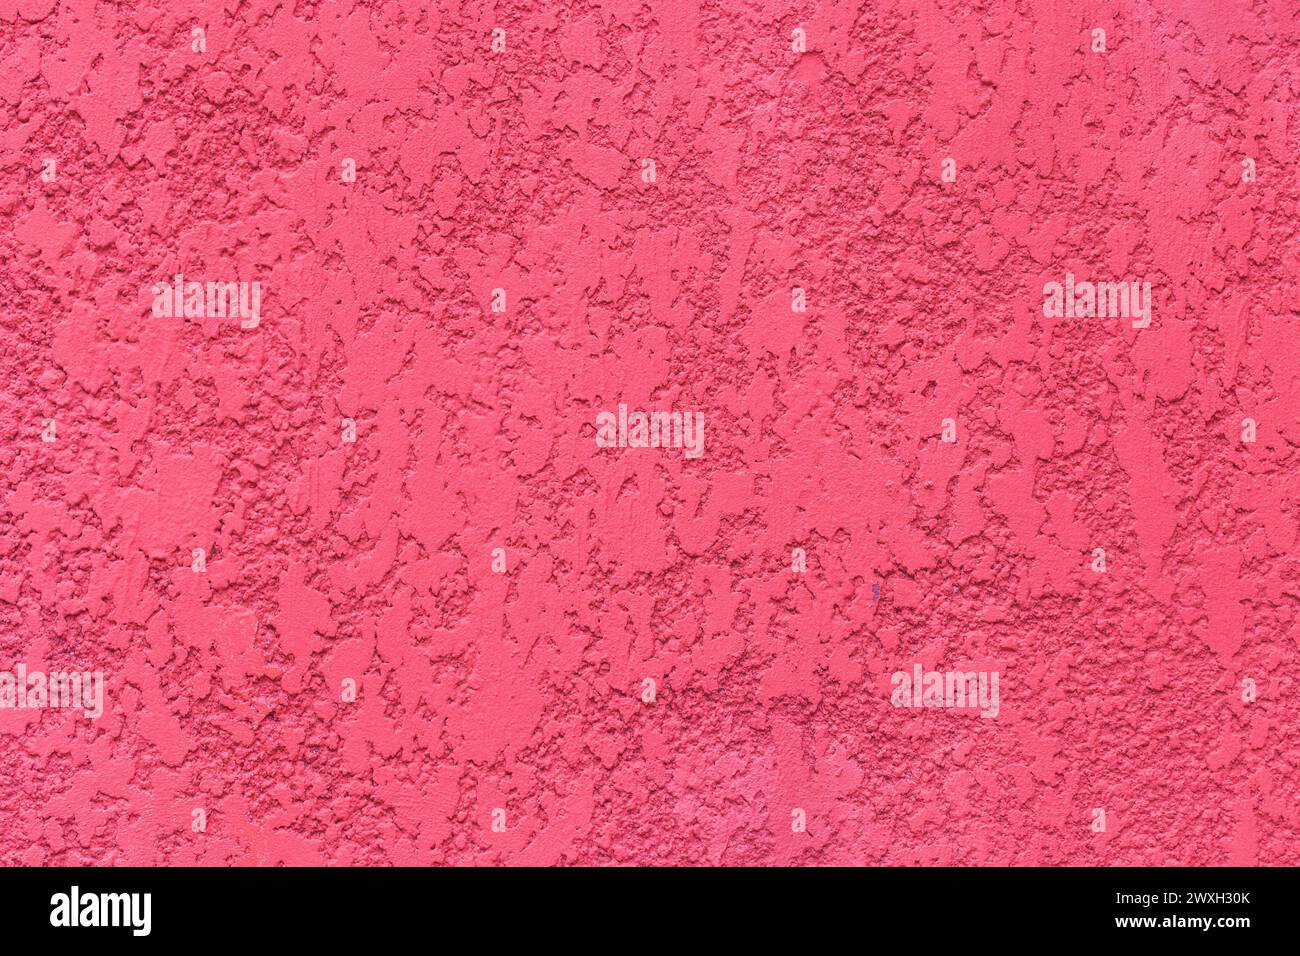 Pink paint wall plaster abstract solid background surface texture stucco pattern rough. Stock Photo